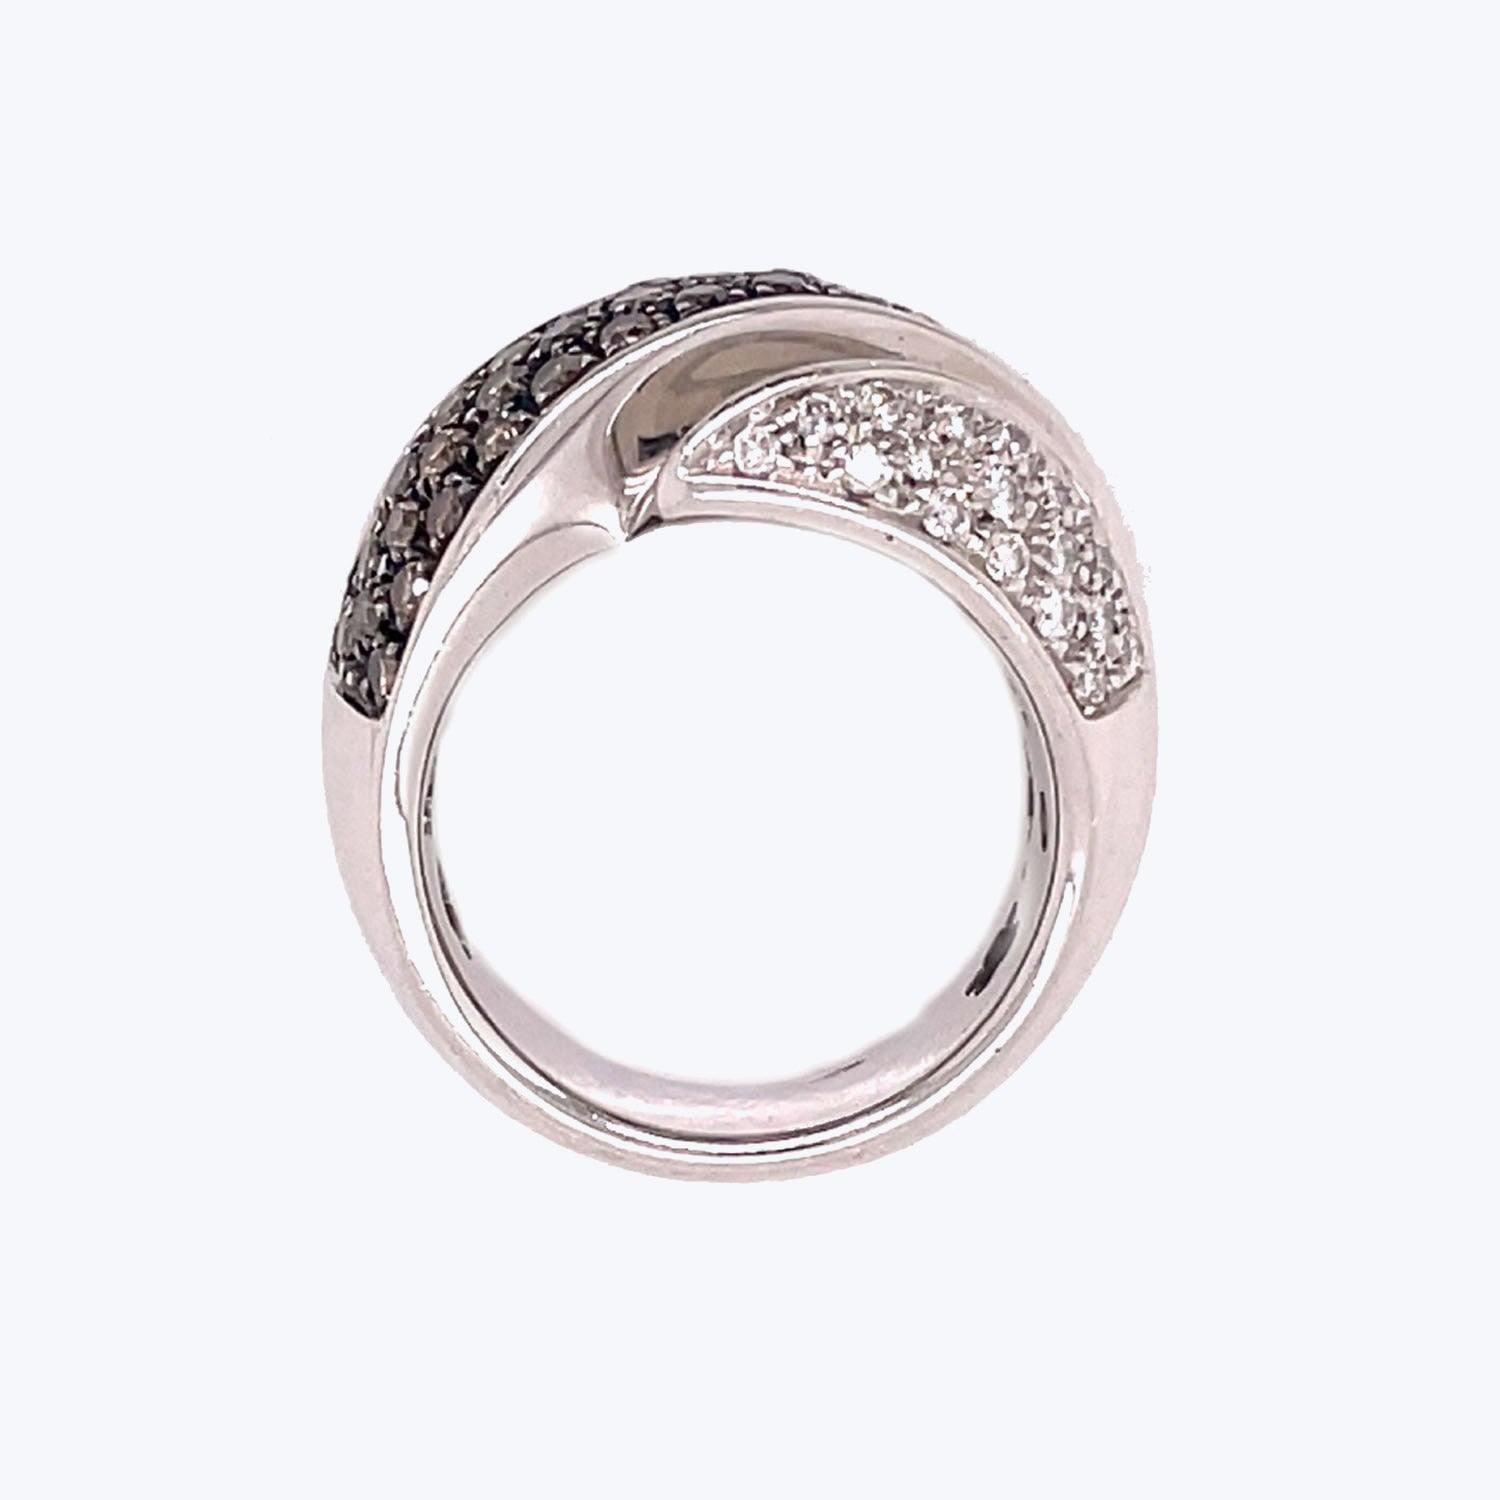 Silver ring with split band showcases contrasting gemstone encrusted sides.